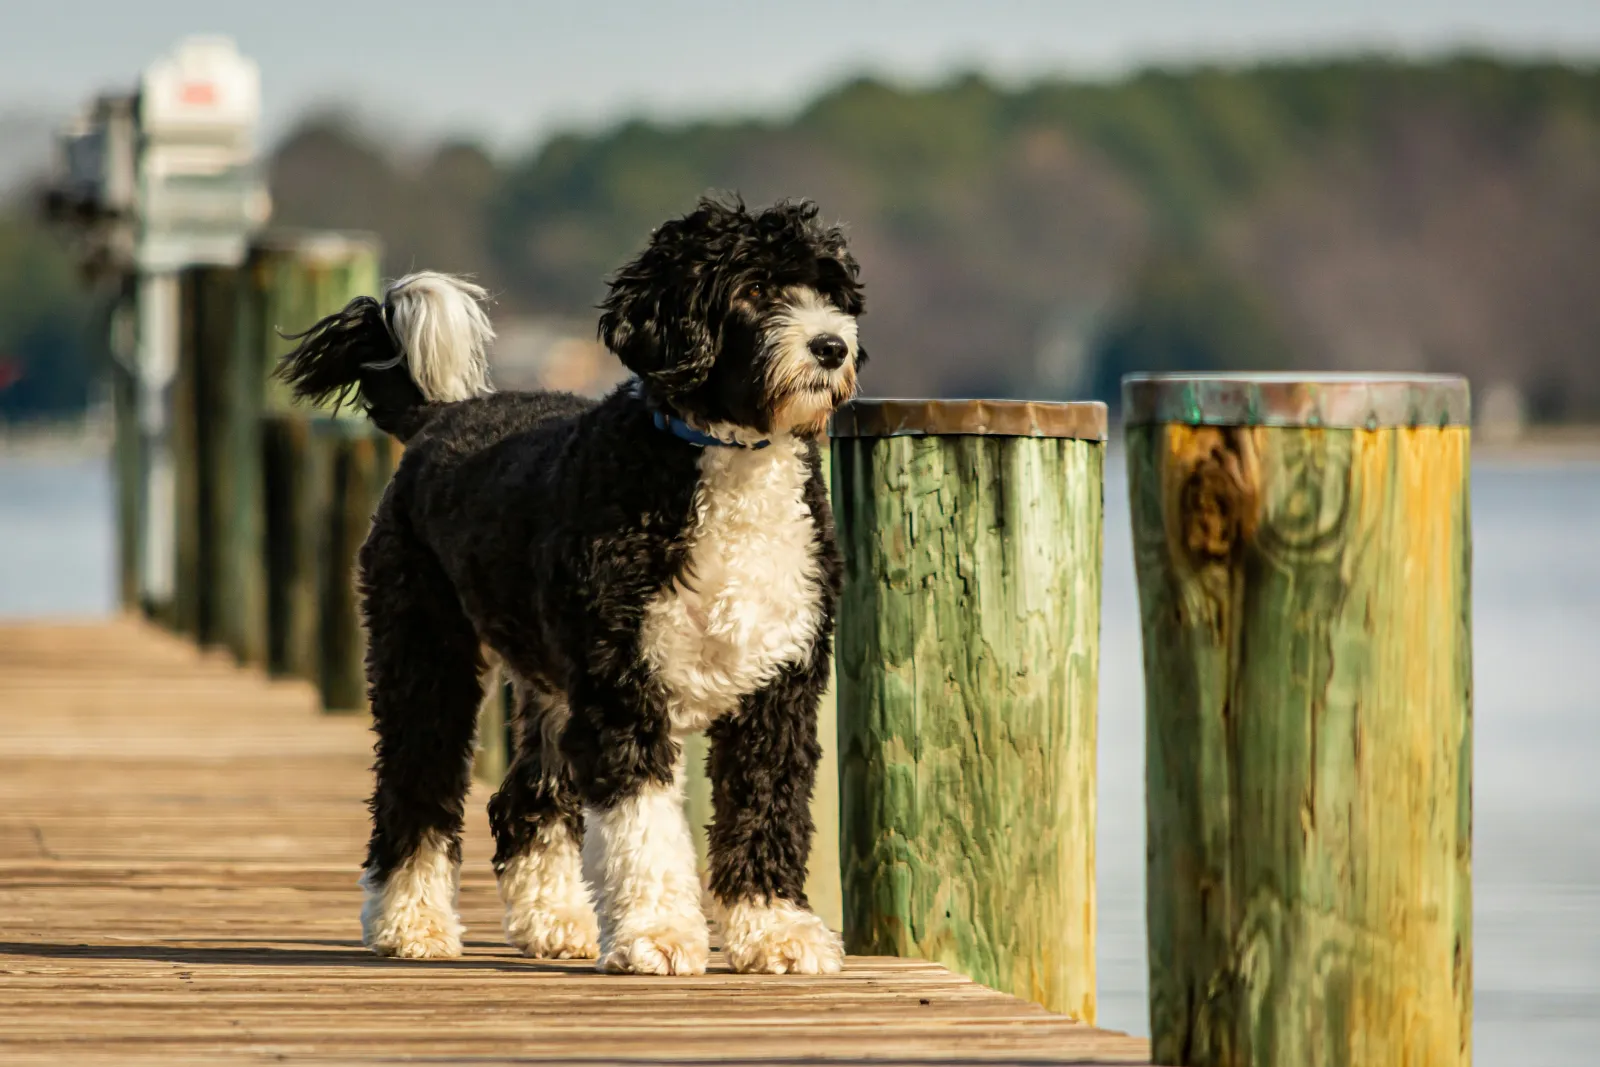 A Portuguese Water Dog, a hypoallergenic dog breed, standing on a dock looking out at the water